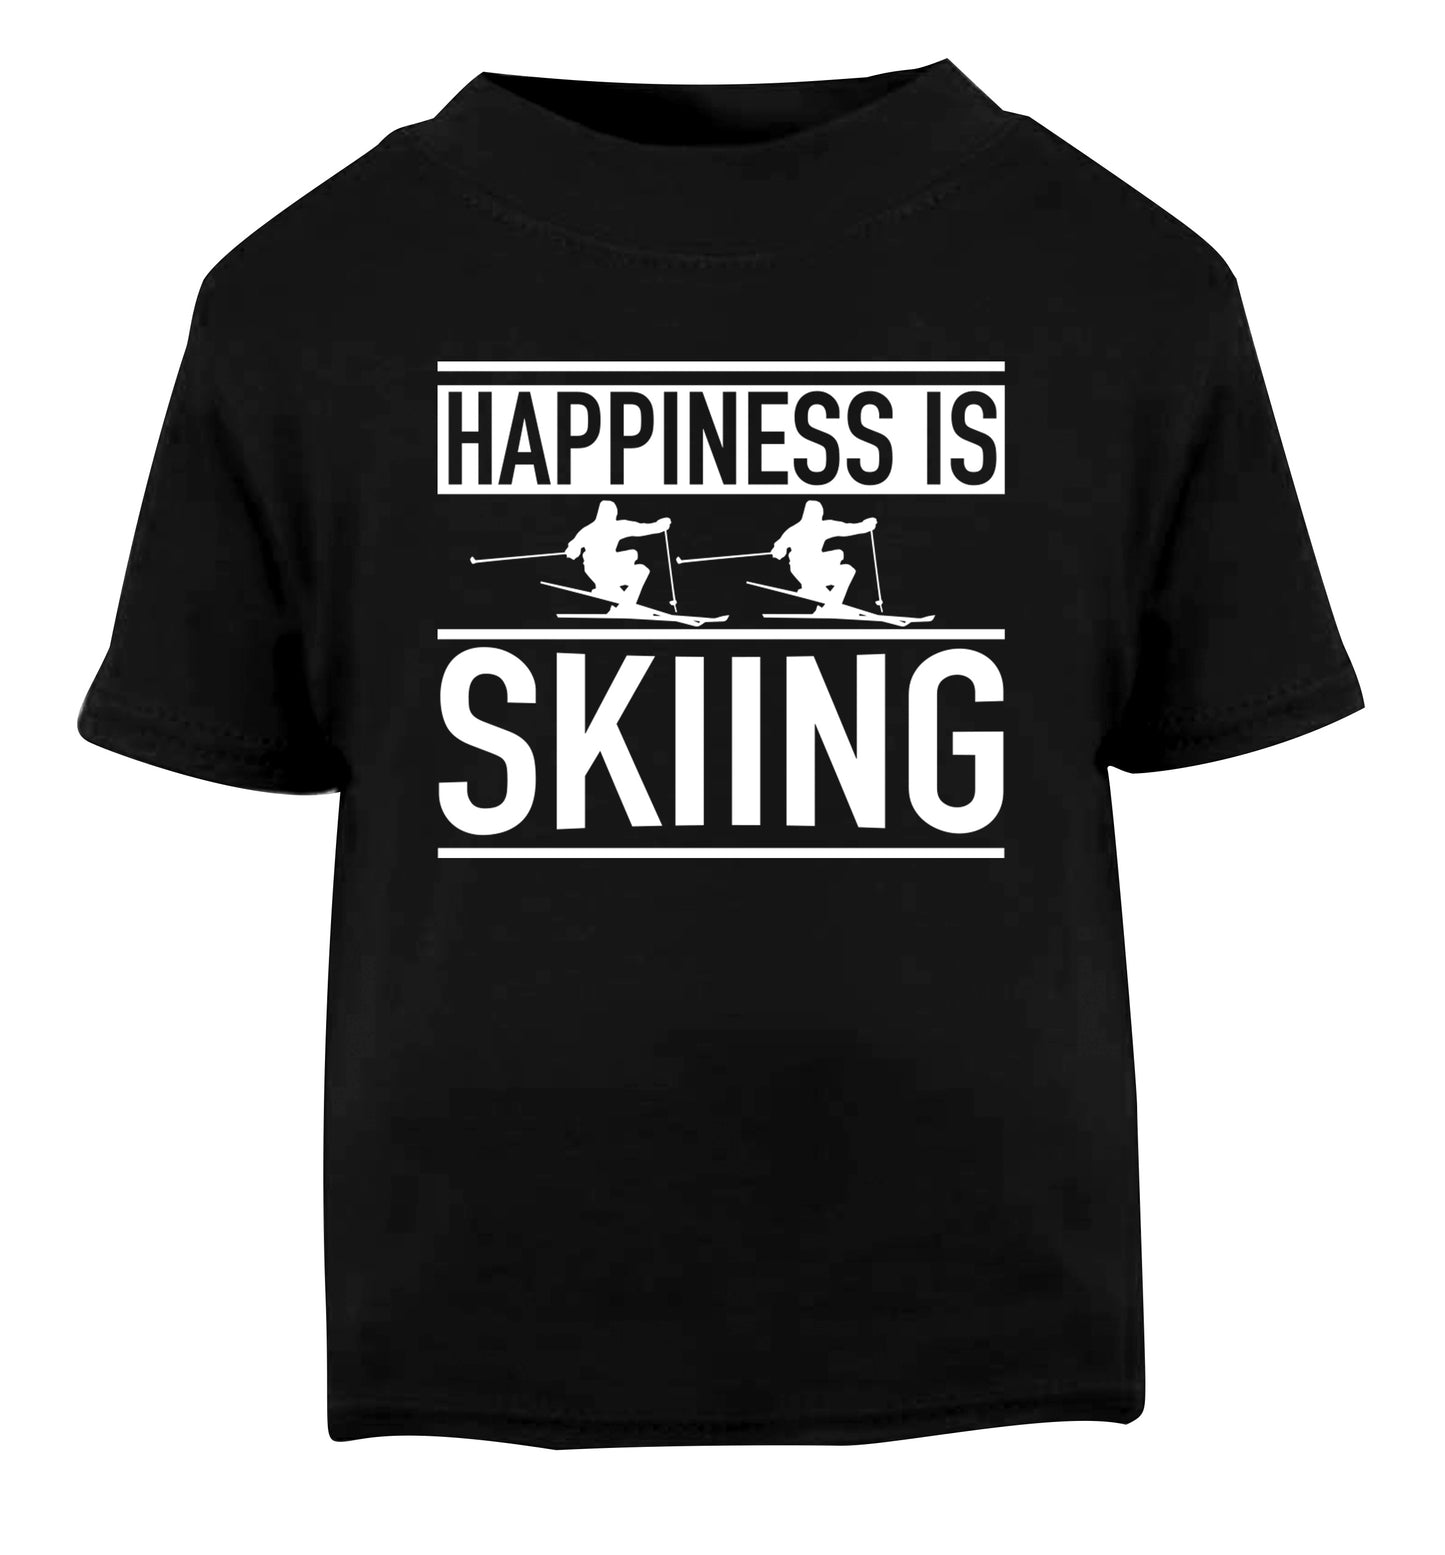 Happiness is skiing Black Baby Toddler Tshirt 2 years